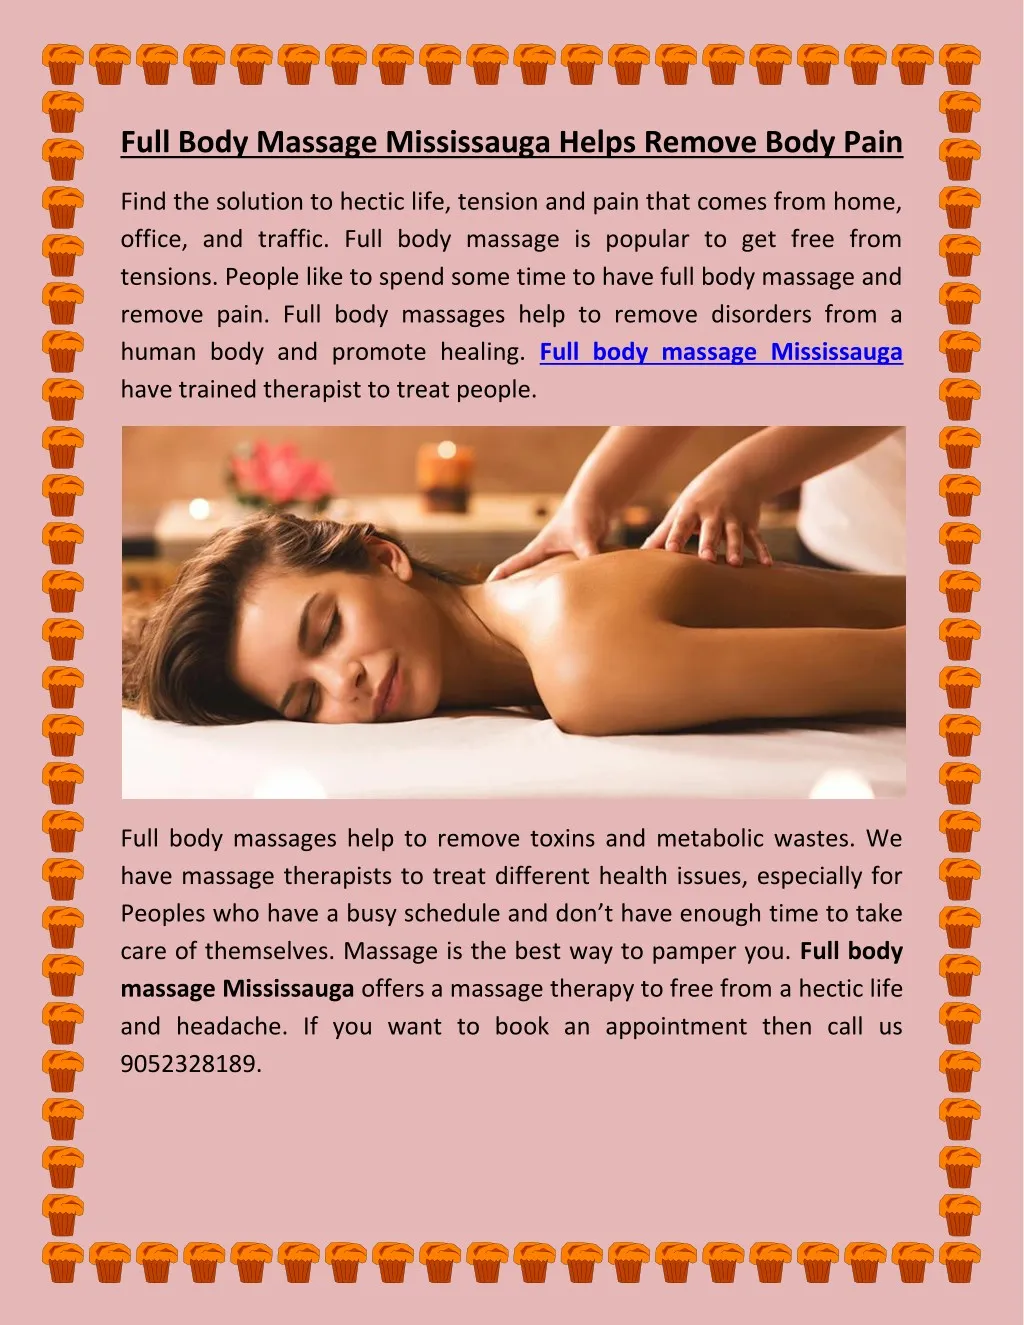 full body massage mississauga helps remove body